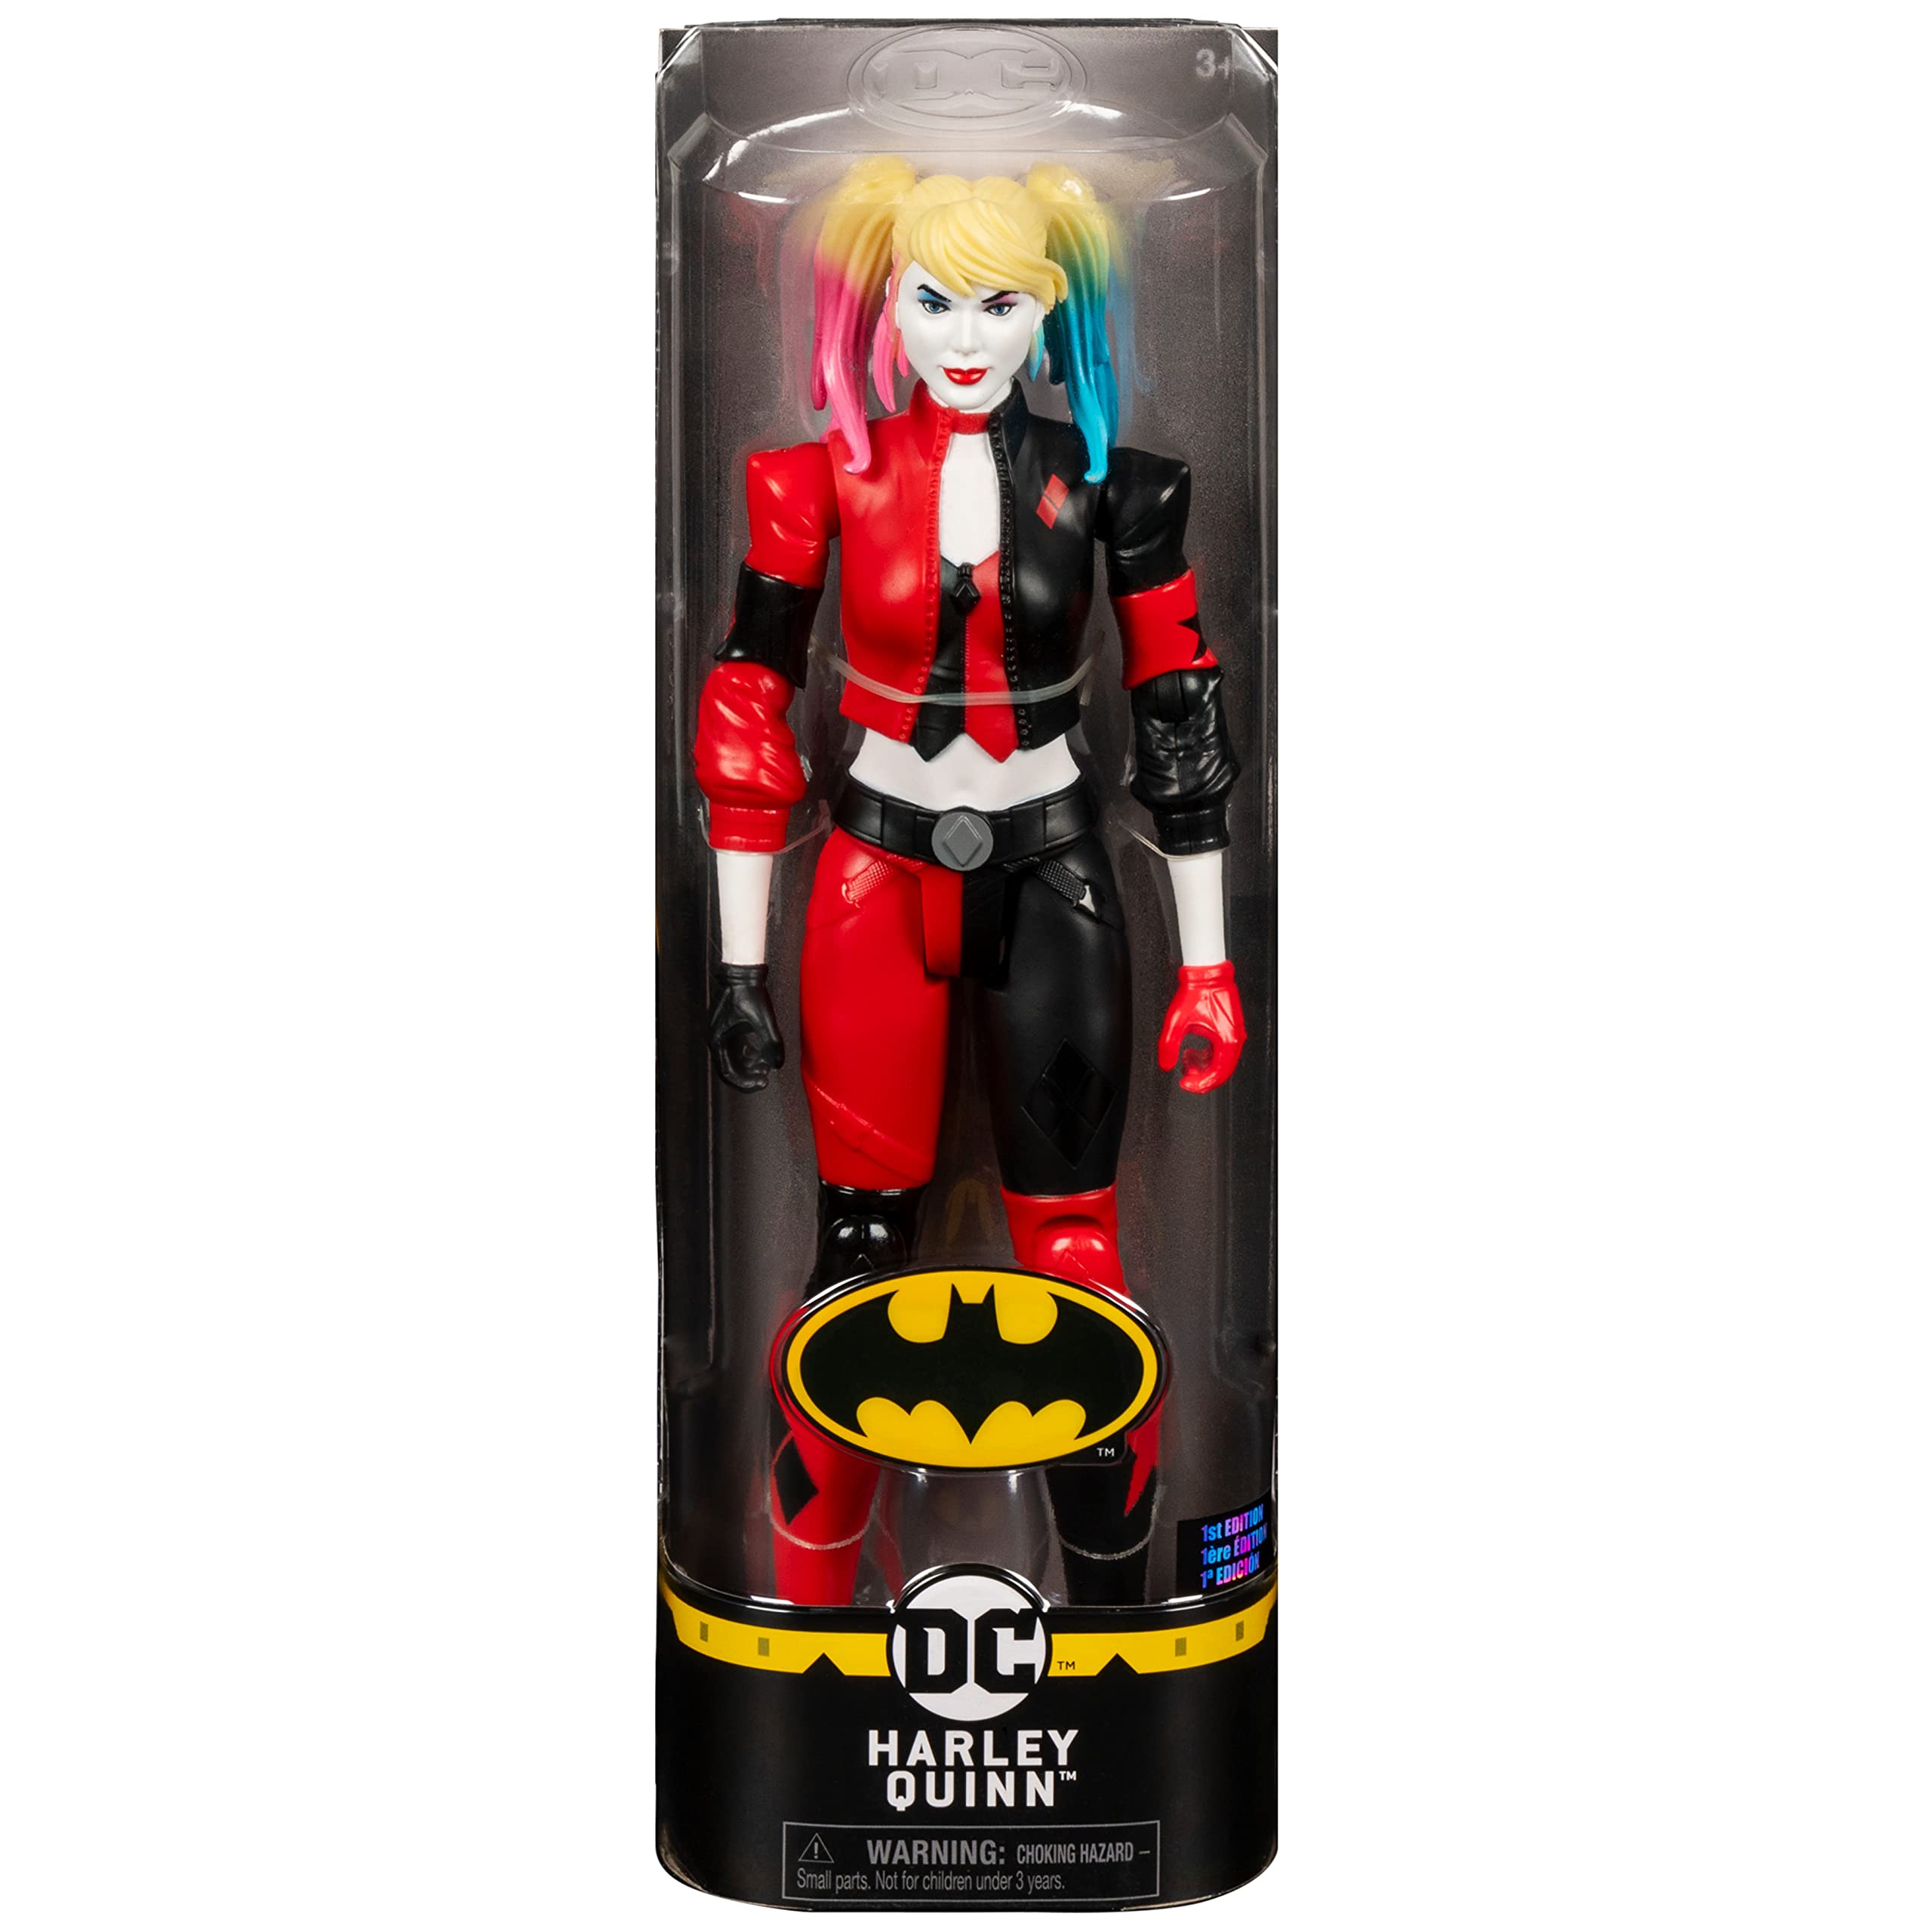 Batman, 12-Inch Harley Quinn Action Figure, Kids Toys for Boys Aged 3 and up (Pack of 2)